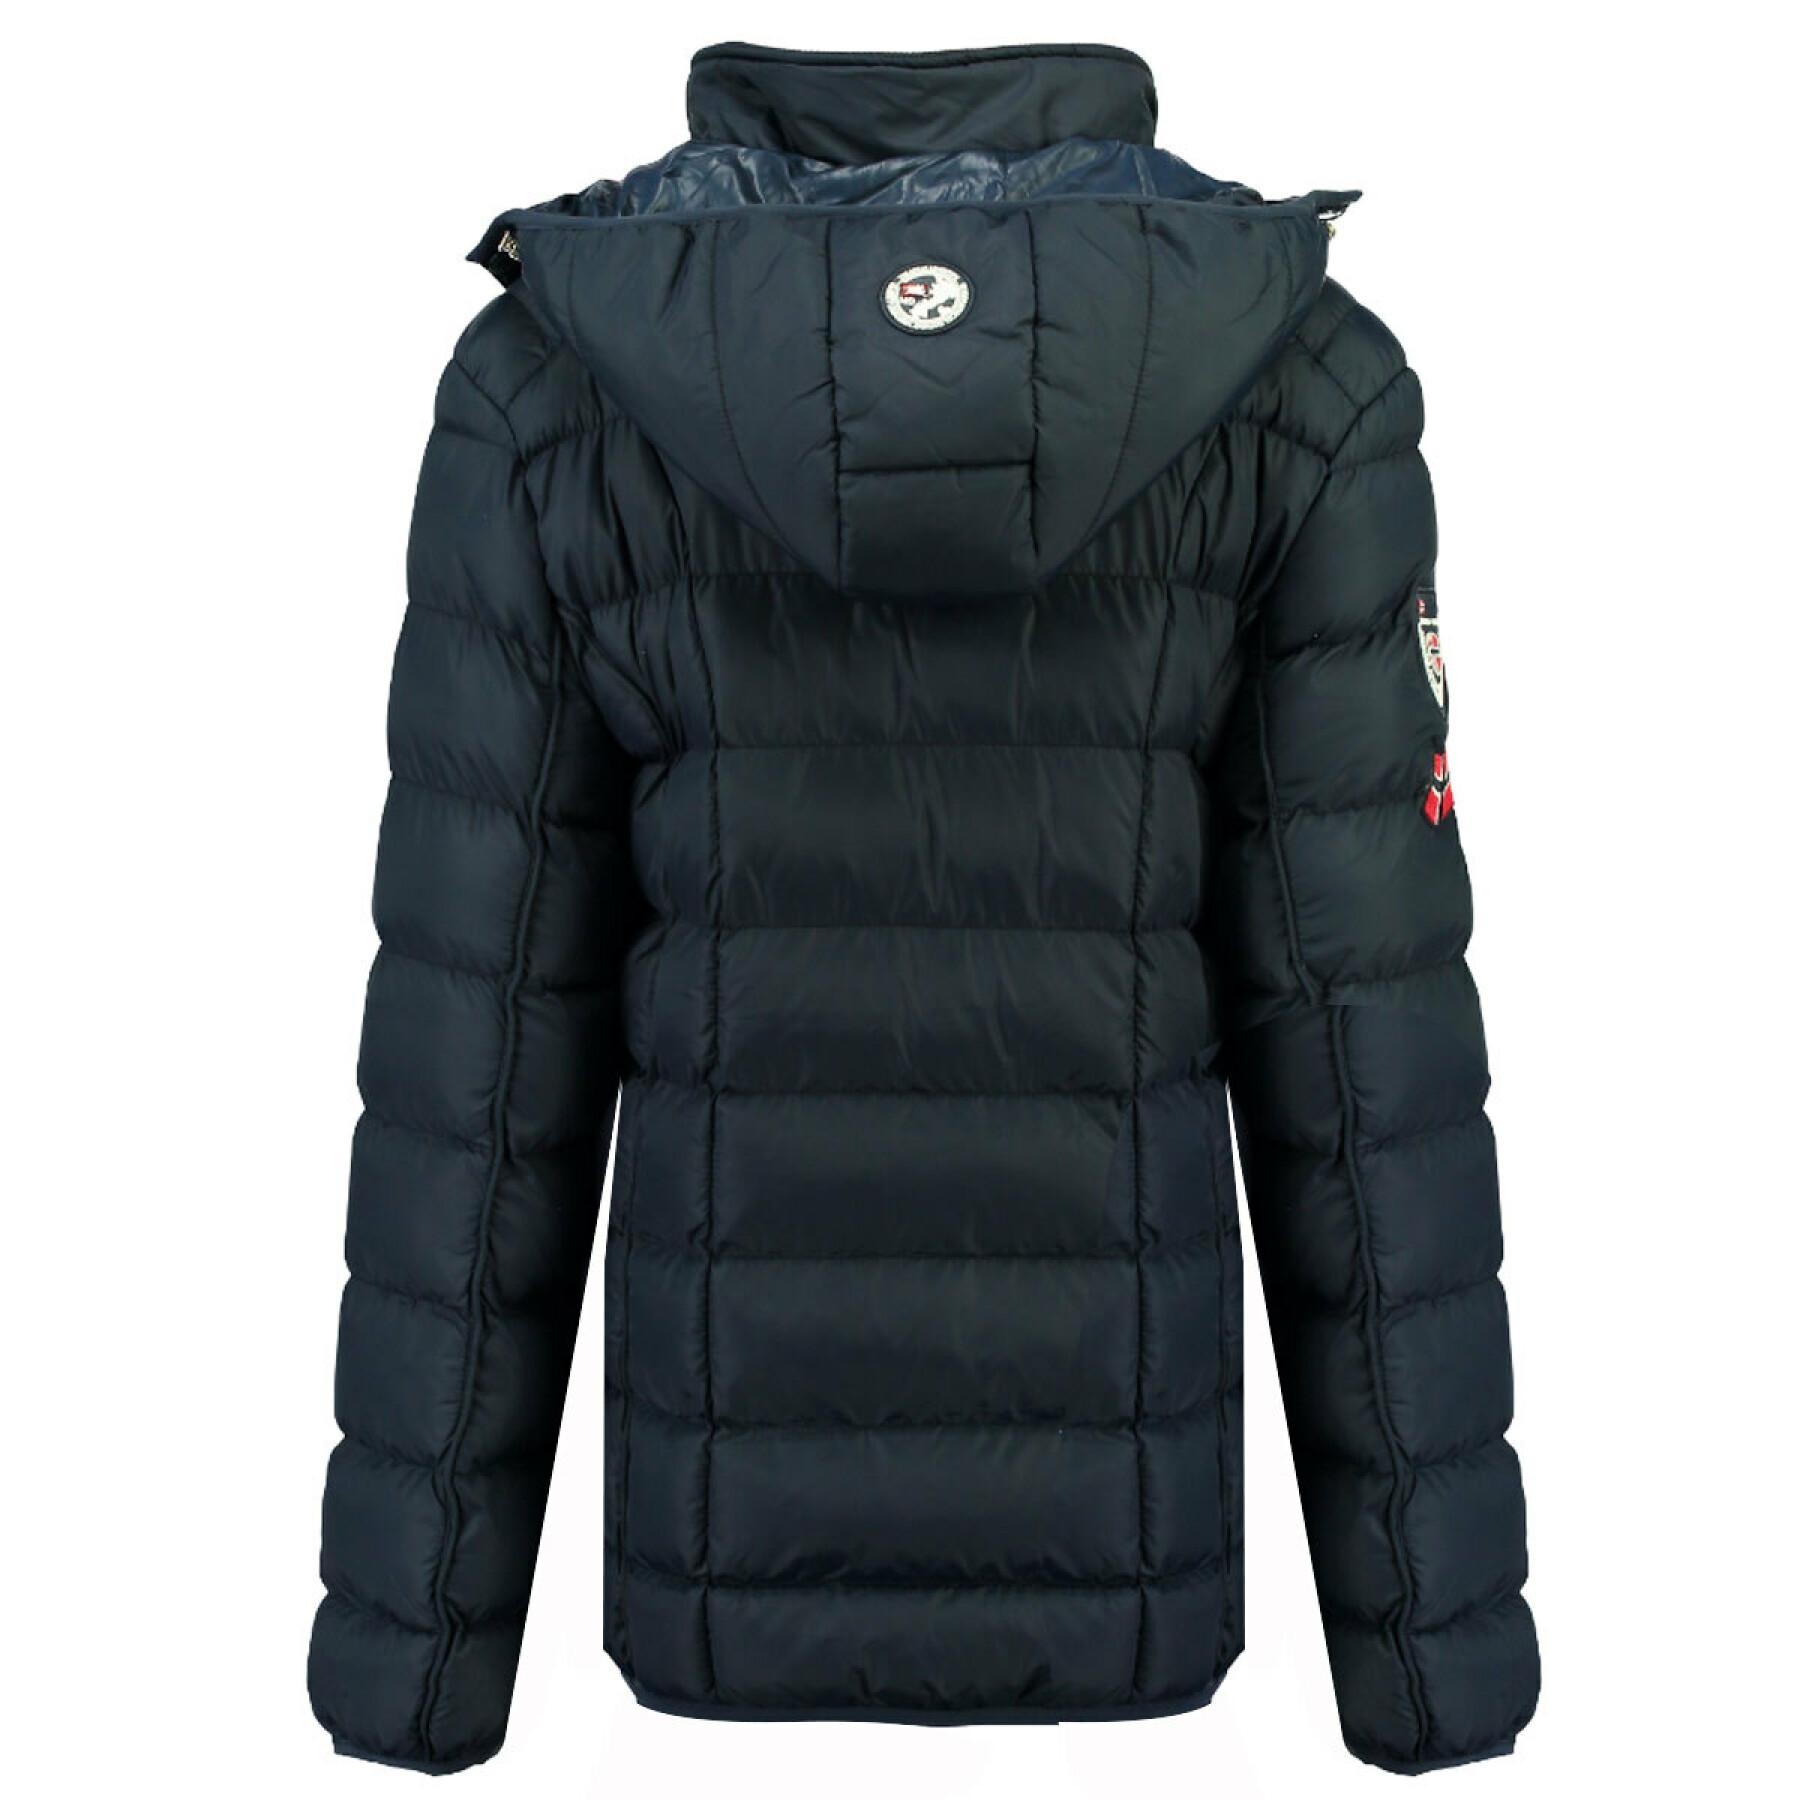 Women's down jacket Geographical Norway Babette Stv